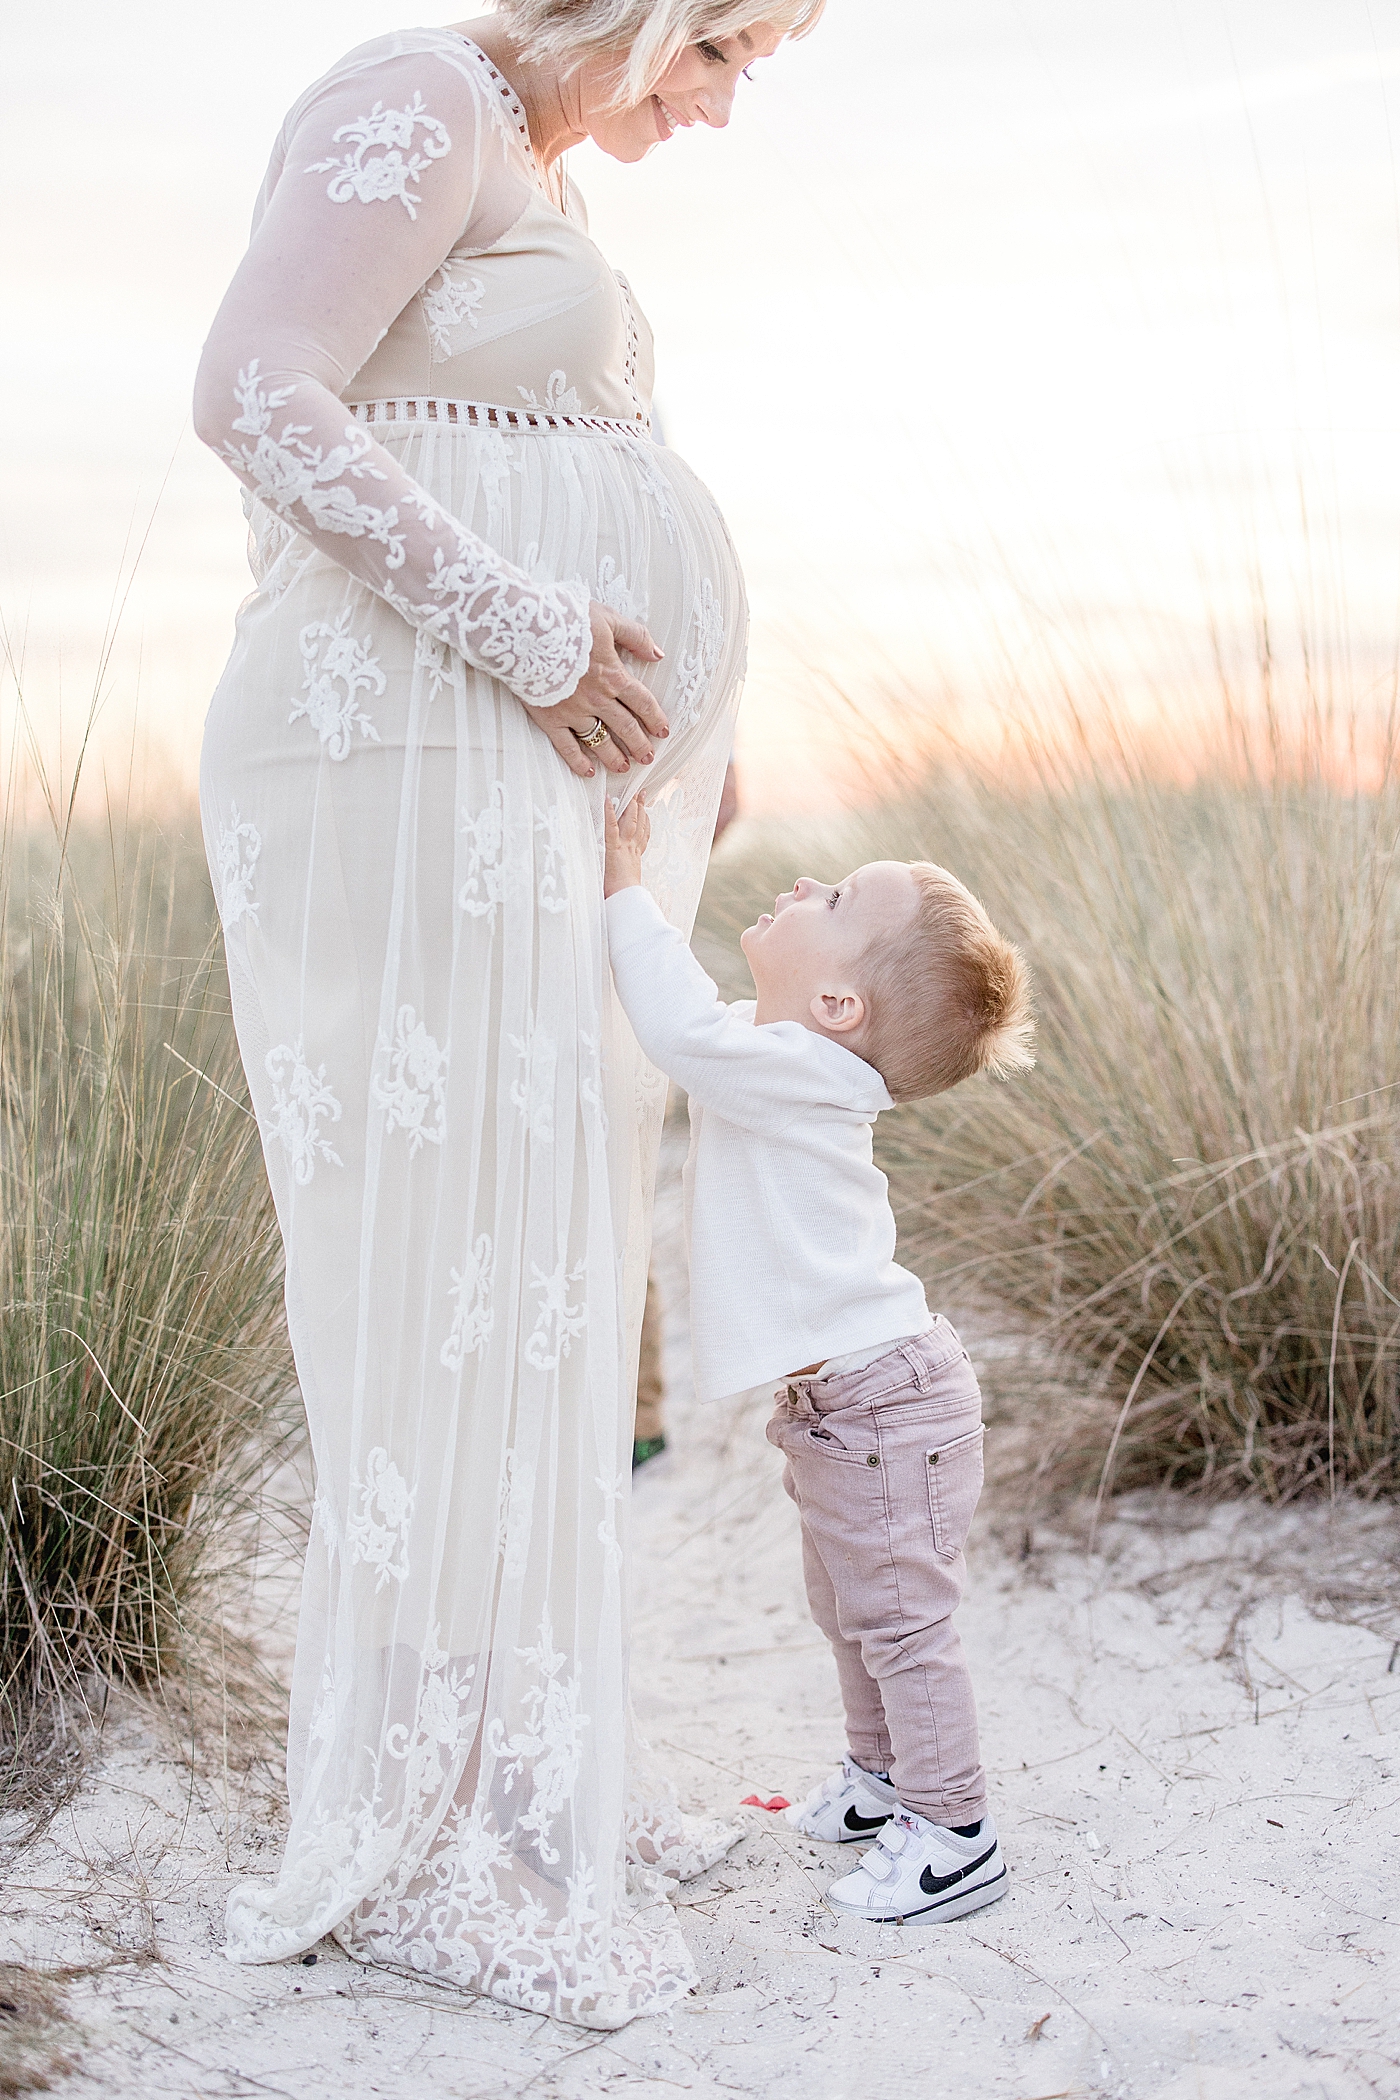 Toddler son looking up at Mom and touching her pregnant belly. Photo by Brittany Elise Photography.